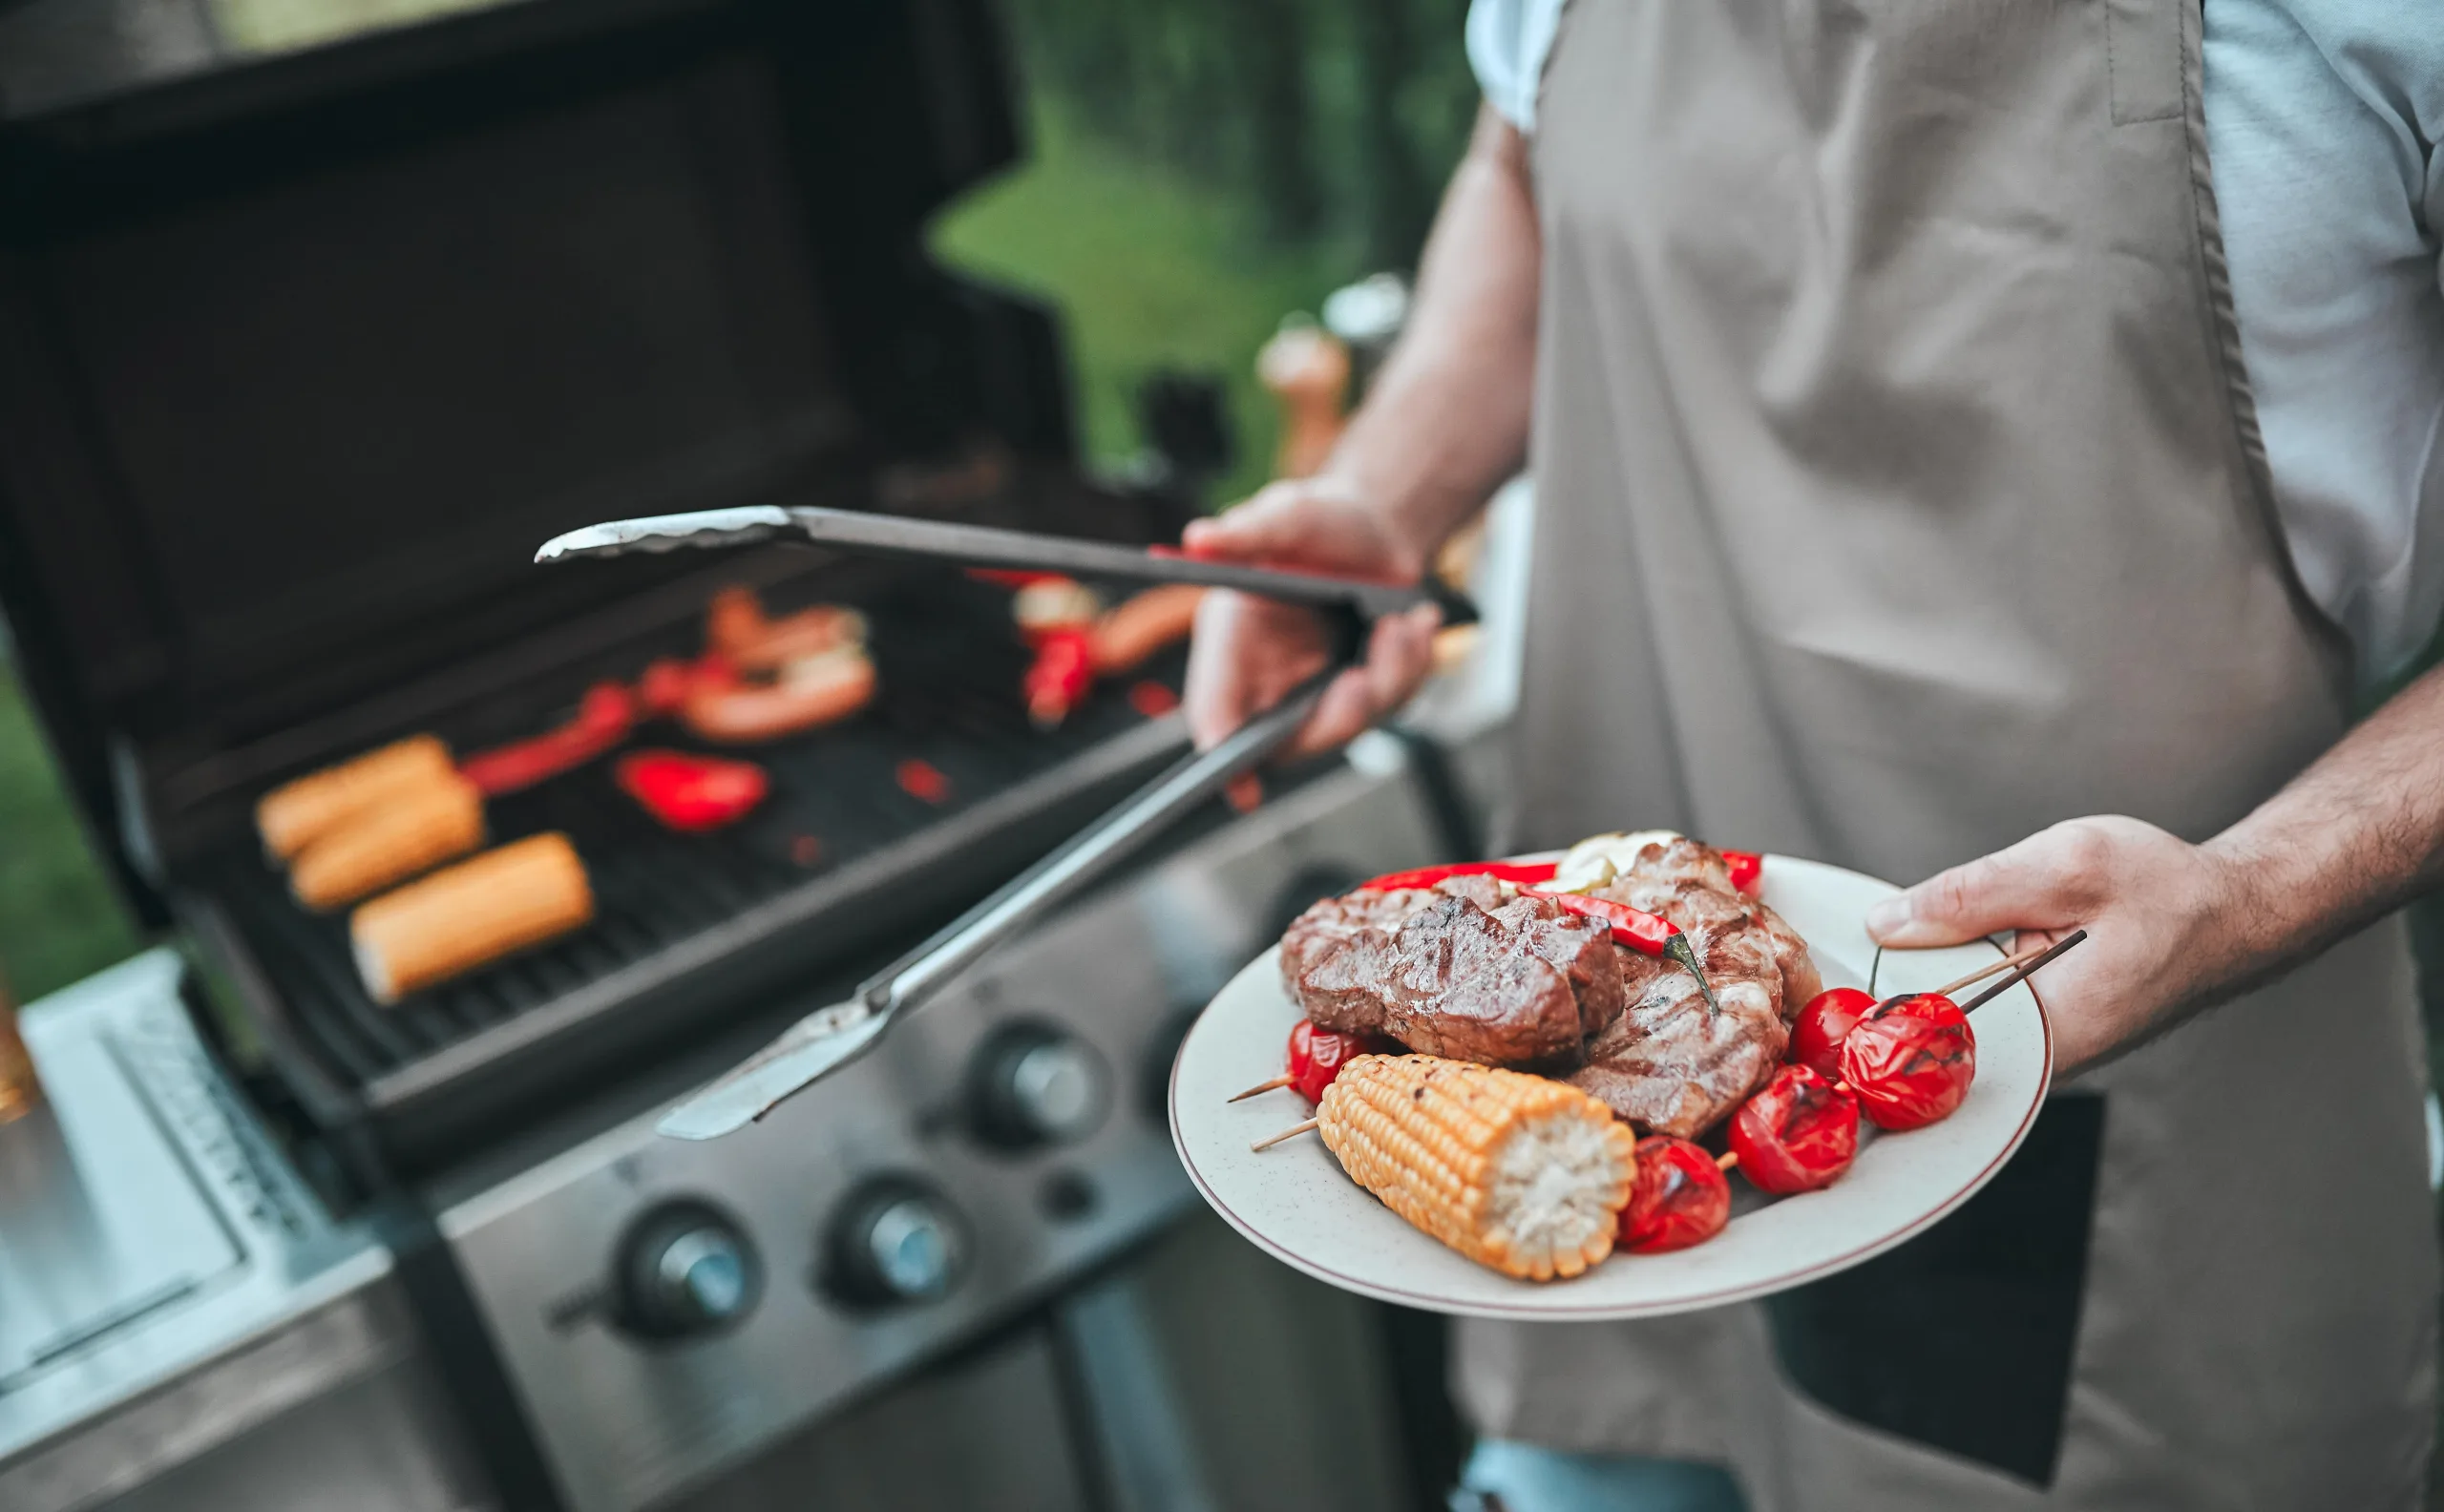 Man holding a plate in front of a grill. The plate has freshly grilled corn, kabobs, and steak and chili peppers. Her is wearing an apron and tongs seeming like he is about to hand the plate to someone before returning to tend to the grill.